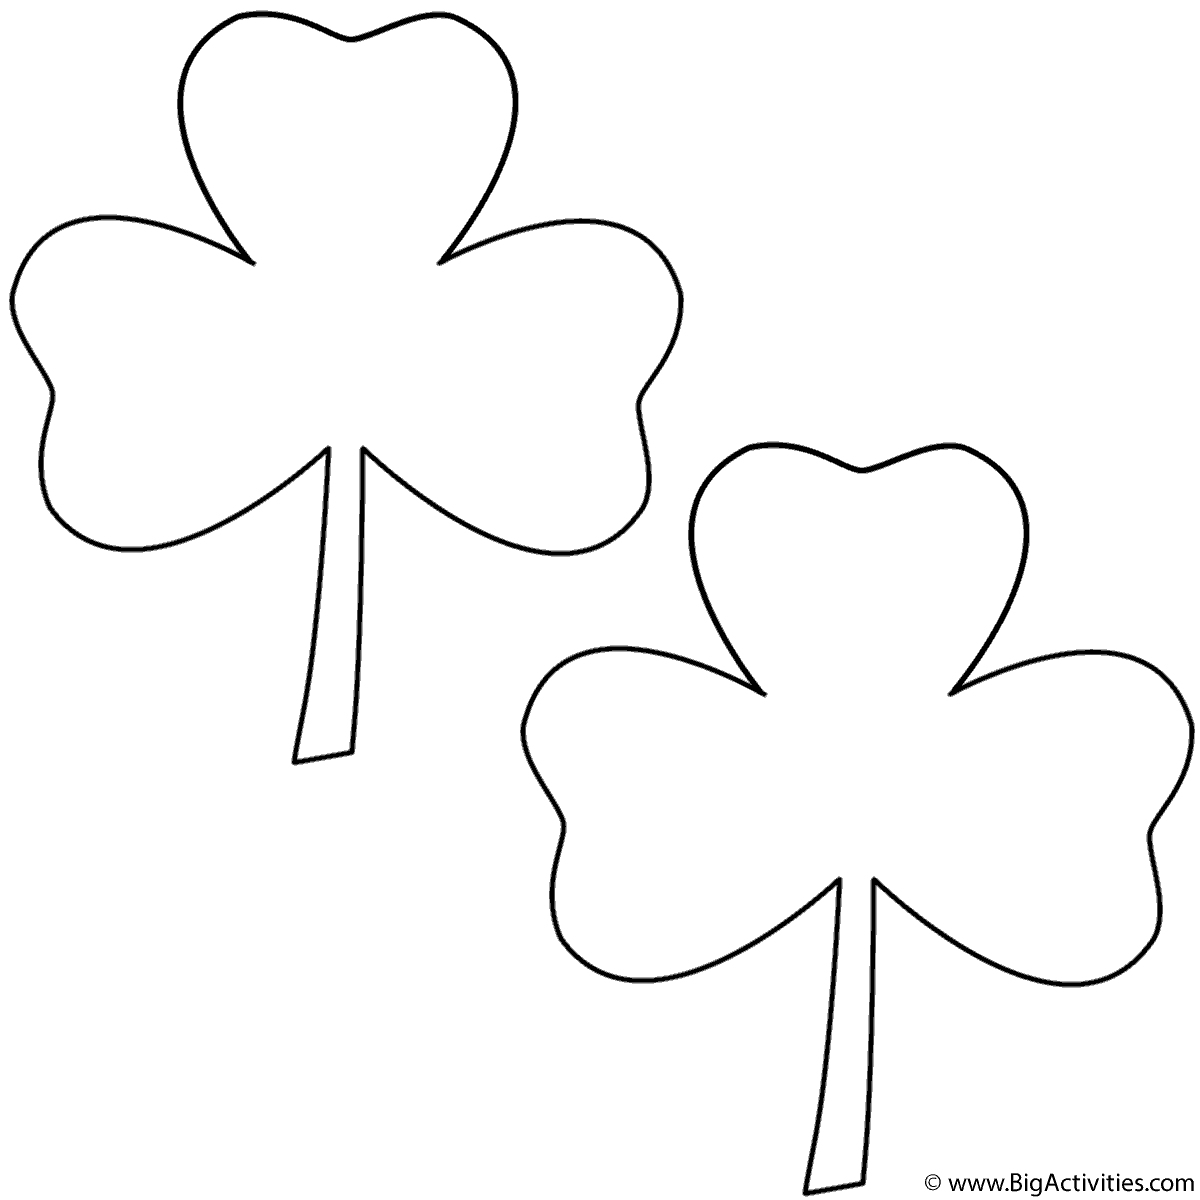 three-leaf-clovers-2-clovers-coloring-page-st-patrick-s-day